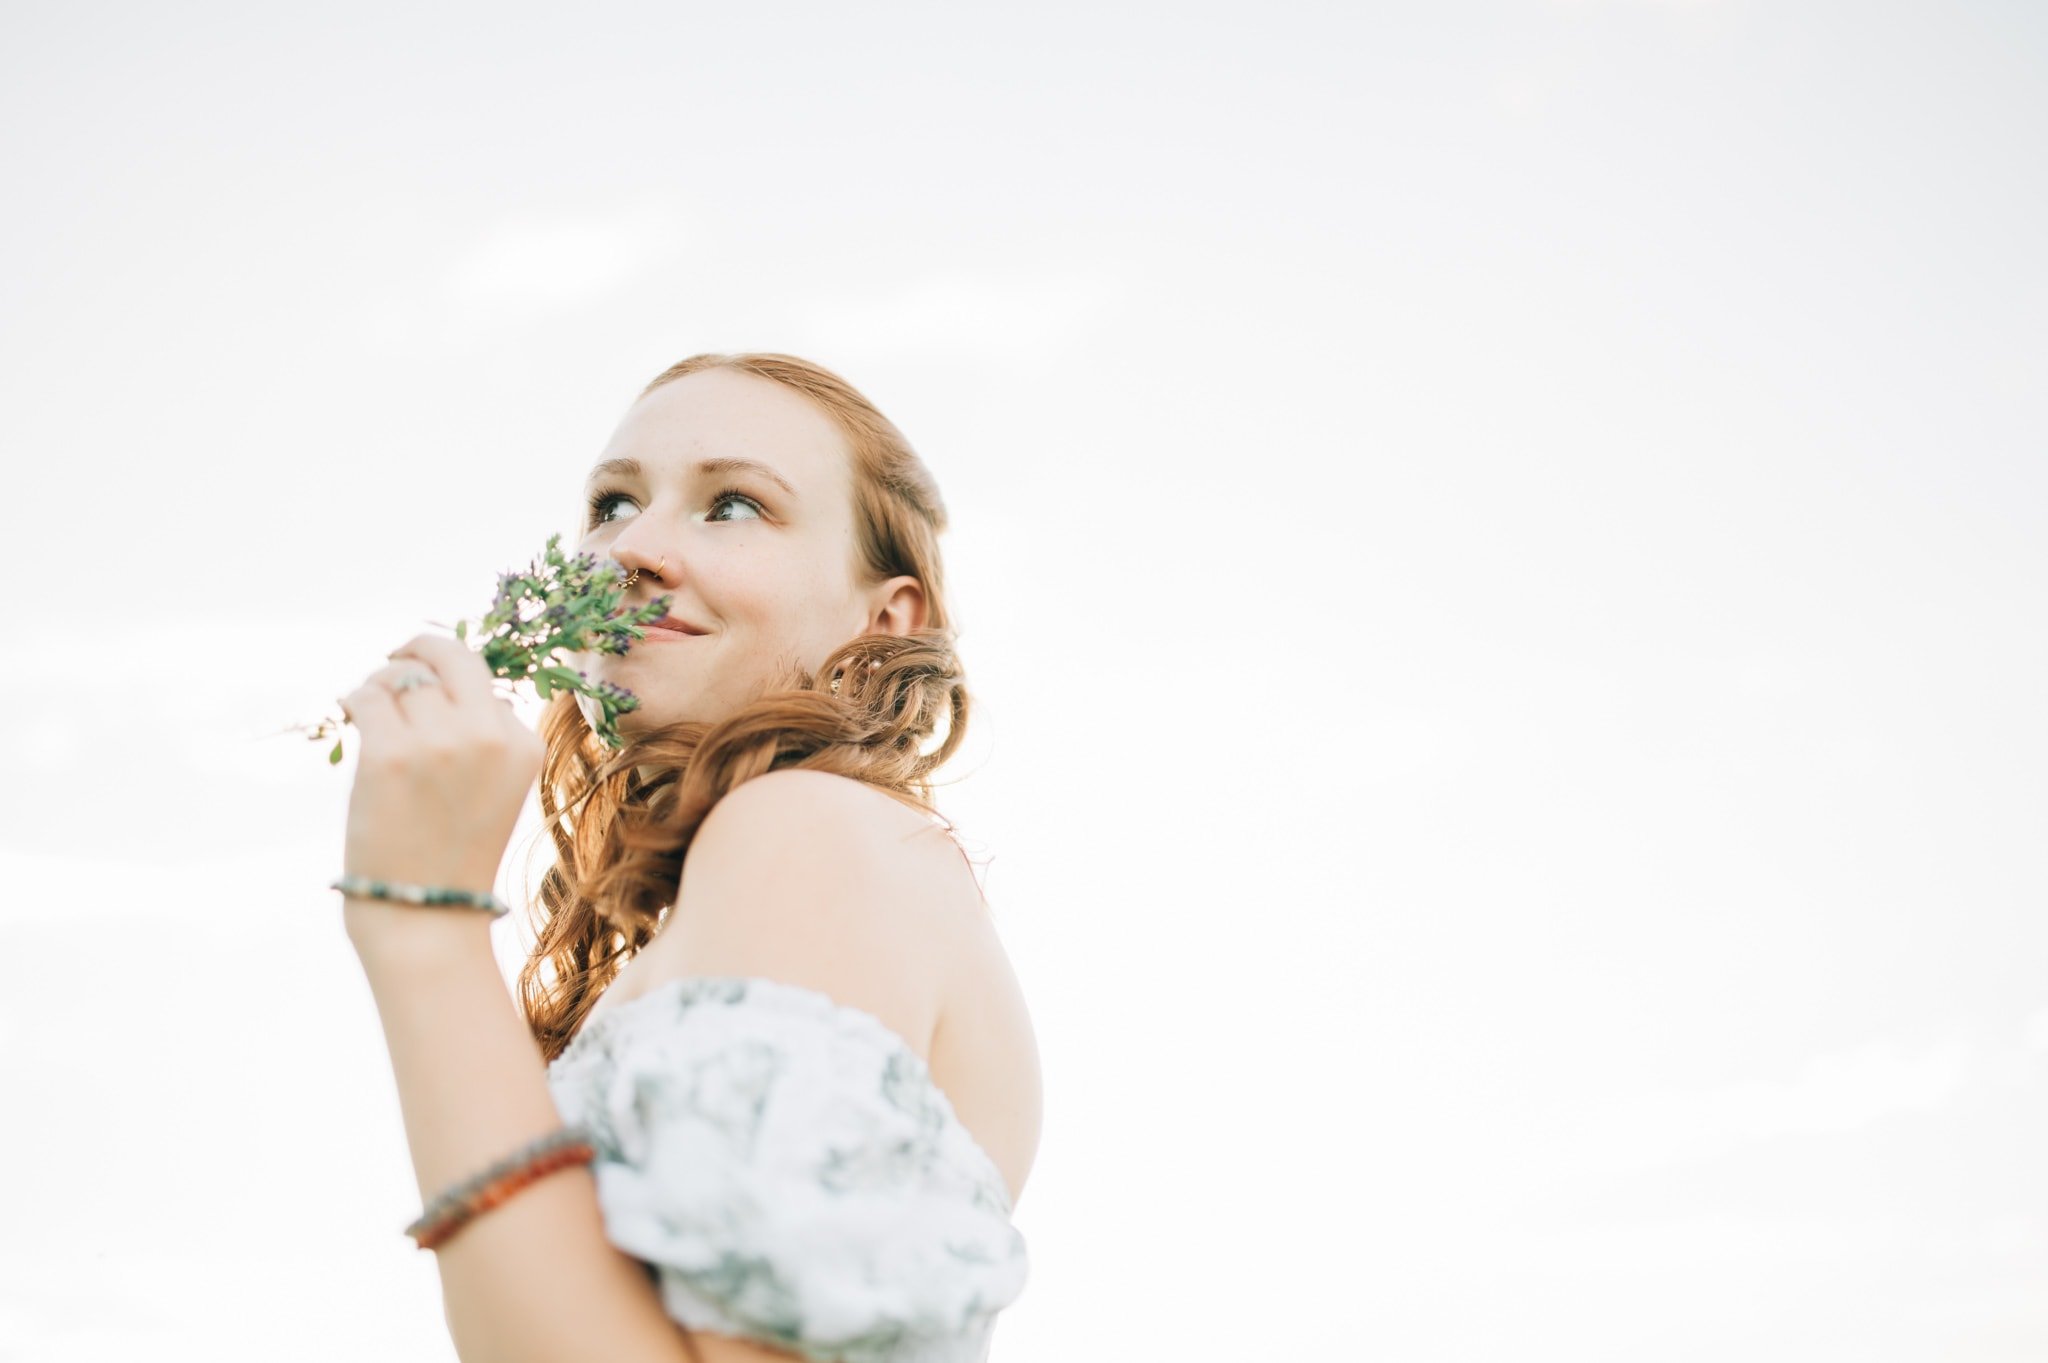 Senior girl holding small bunch of flowers to nose